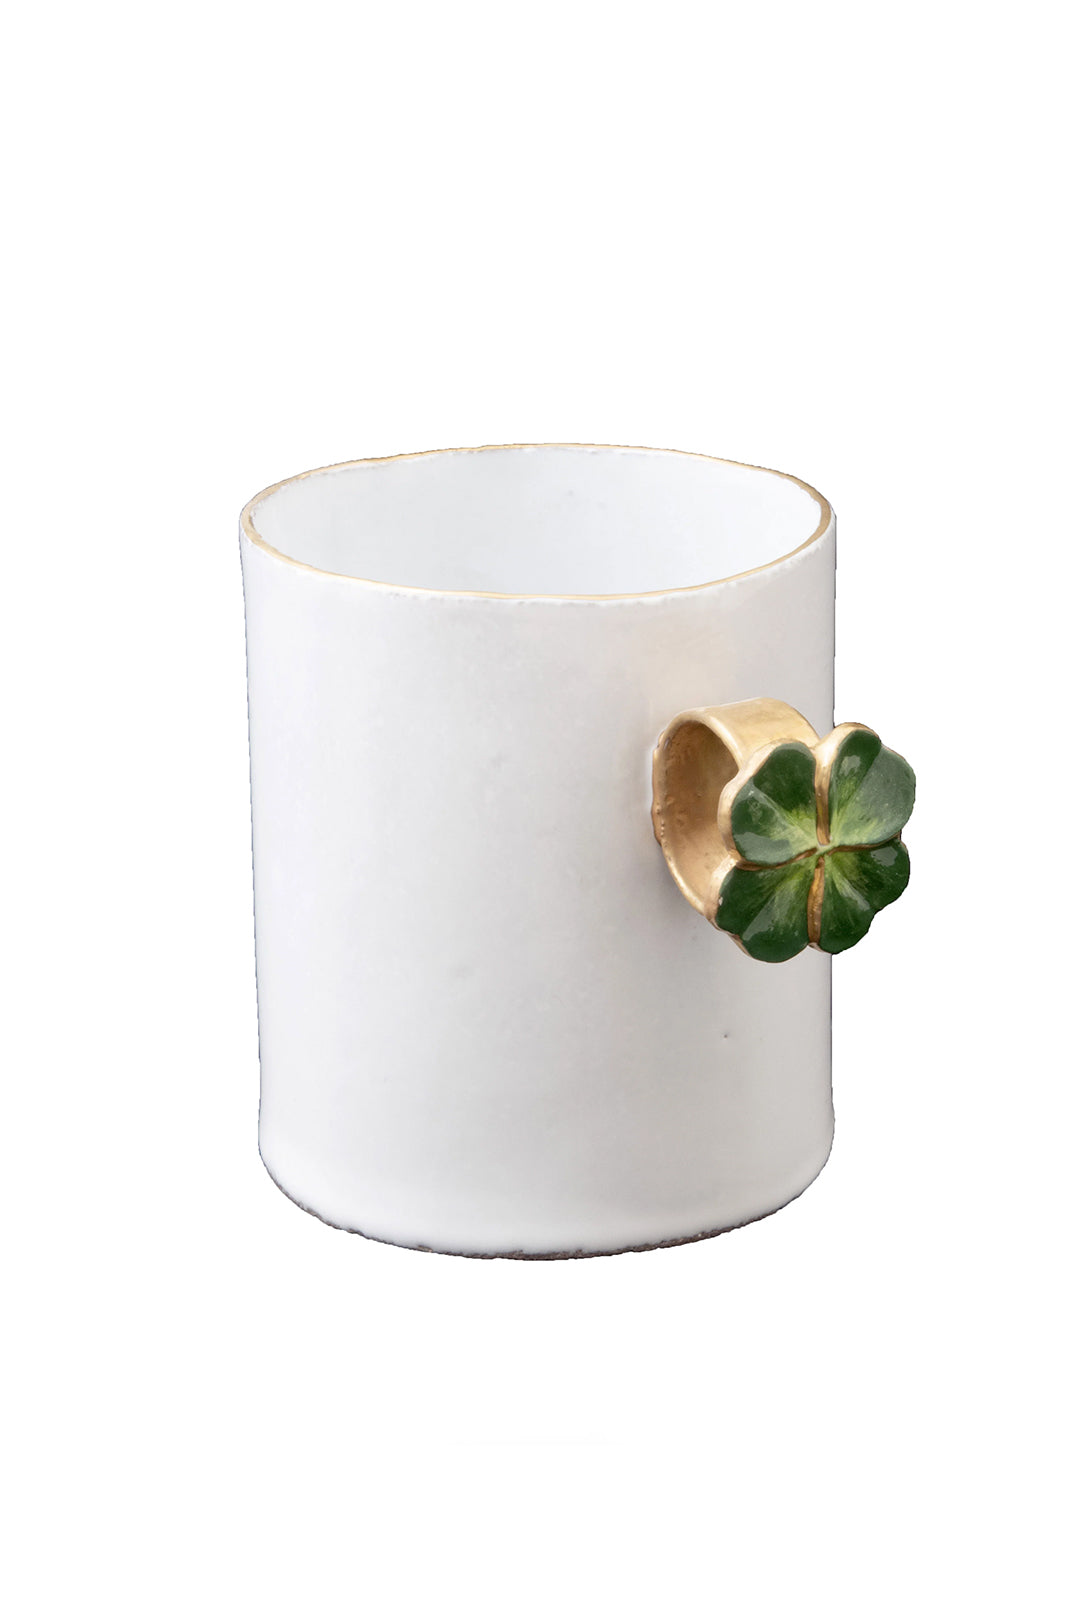 Chance Clover Ring Cup